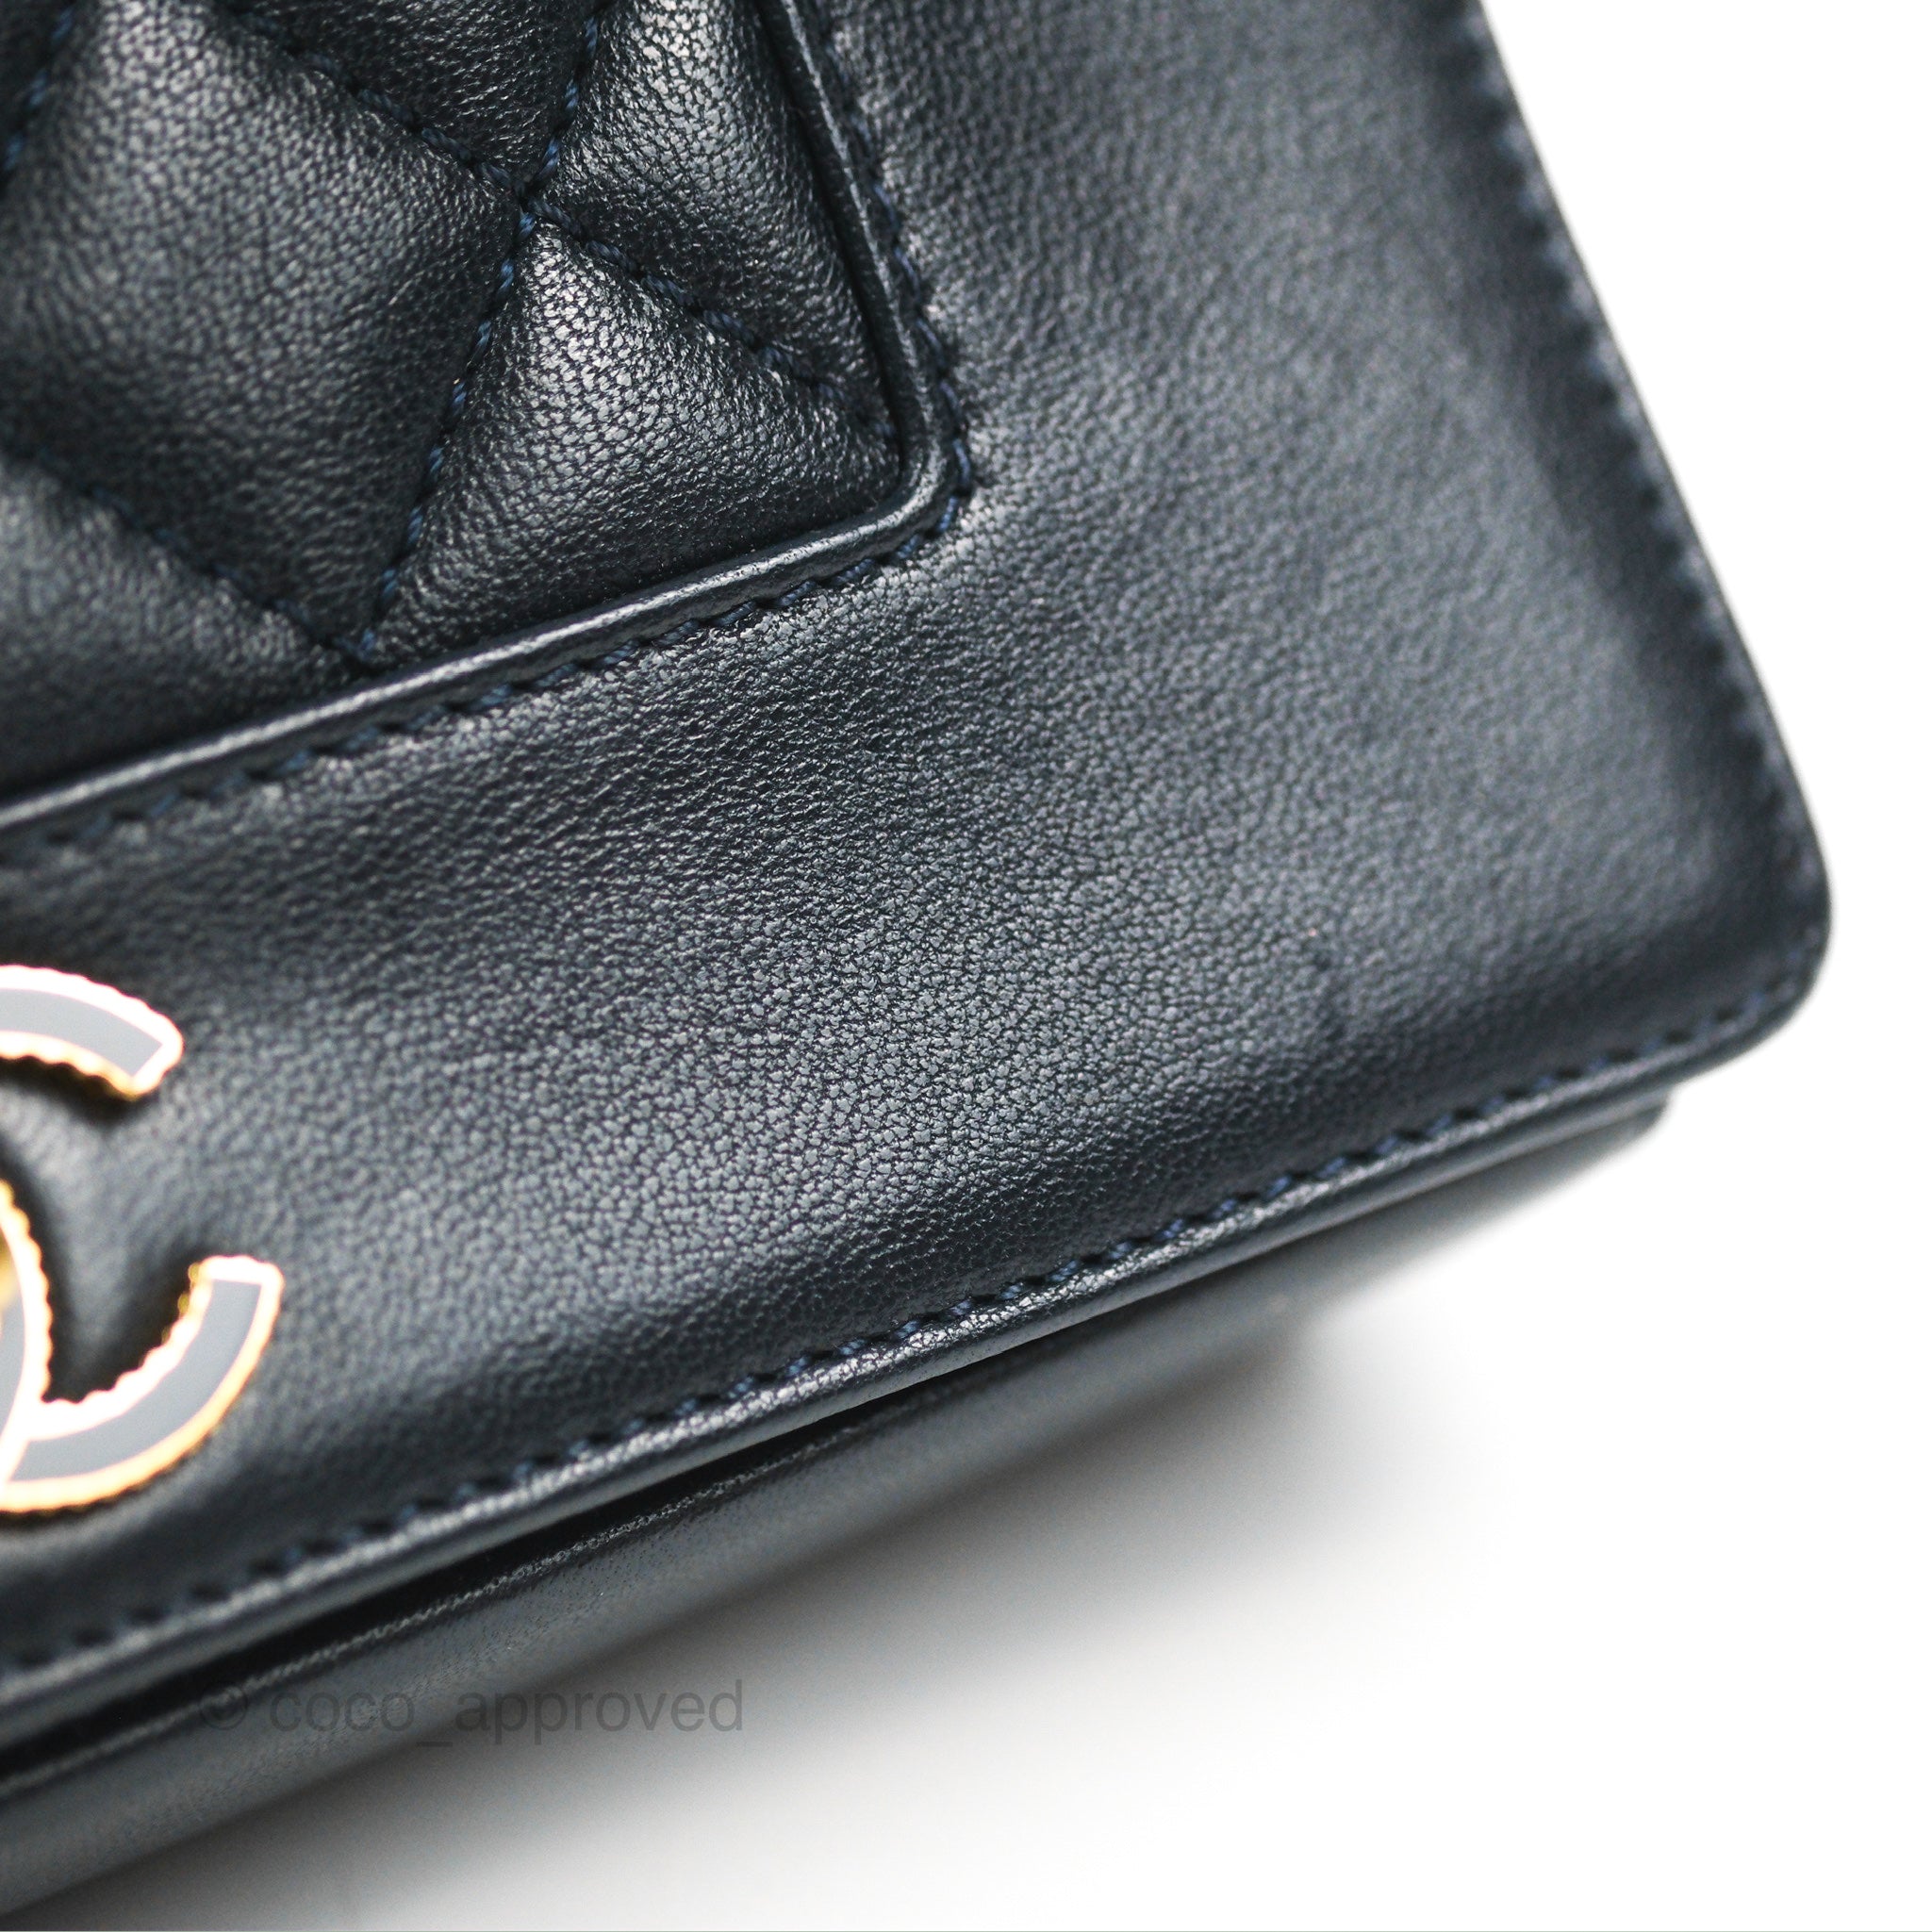 Chanel Navy Blue Chevron Leather Mademoiselle Wallet On Chain